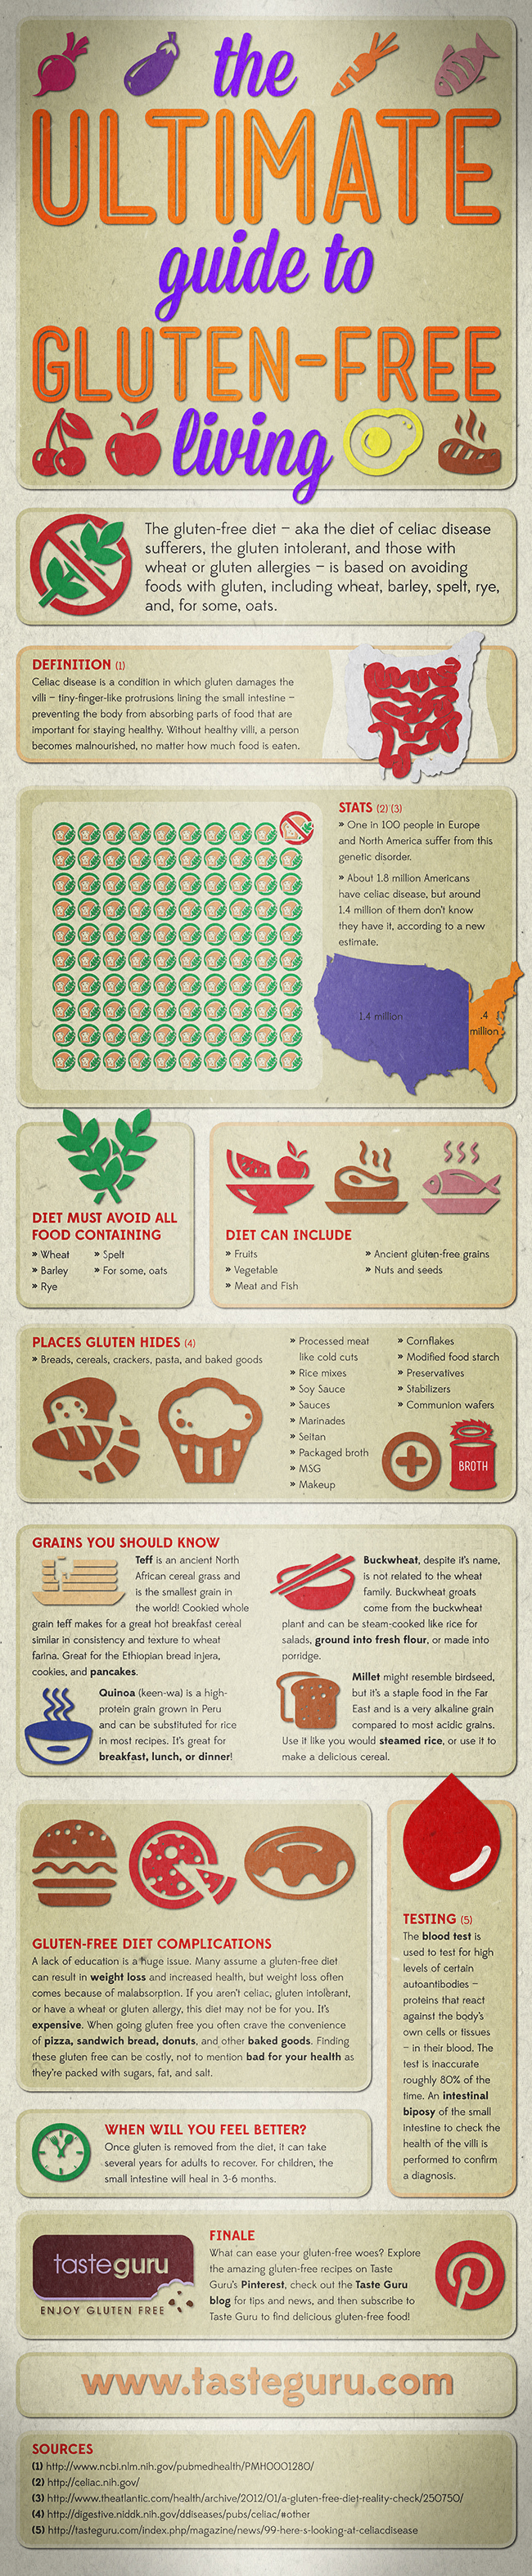 The Ultimate Guide to Gluten-Free Living